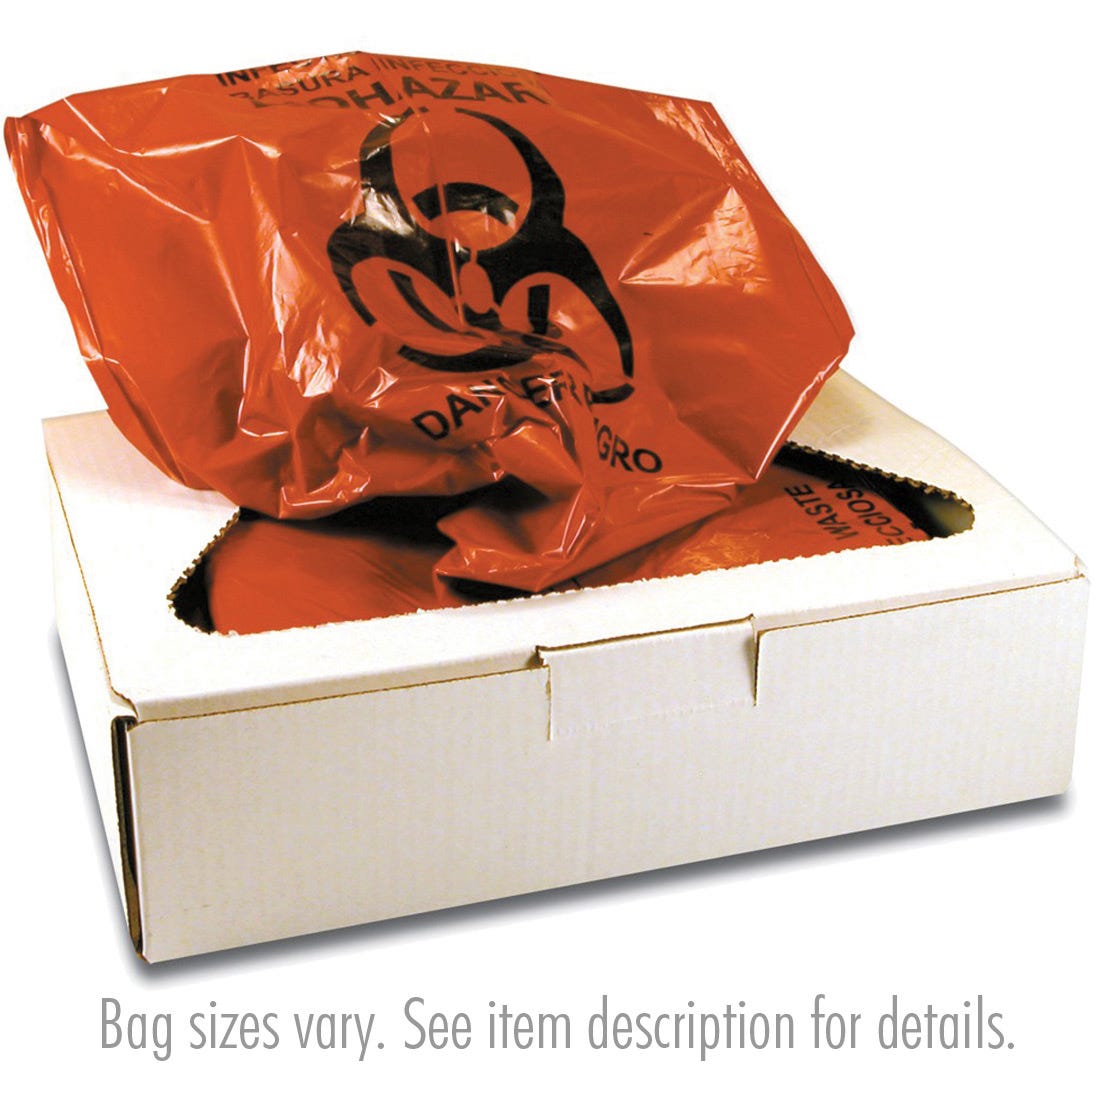 PROTECTOR INFECTIOUS WASTE Bags - 24" x 30", 12 Gallon